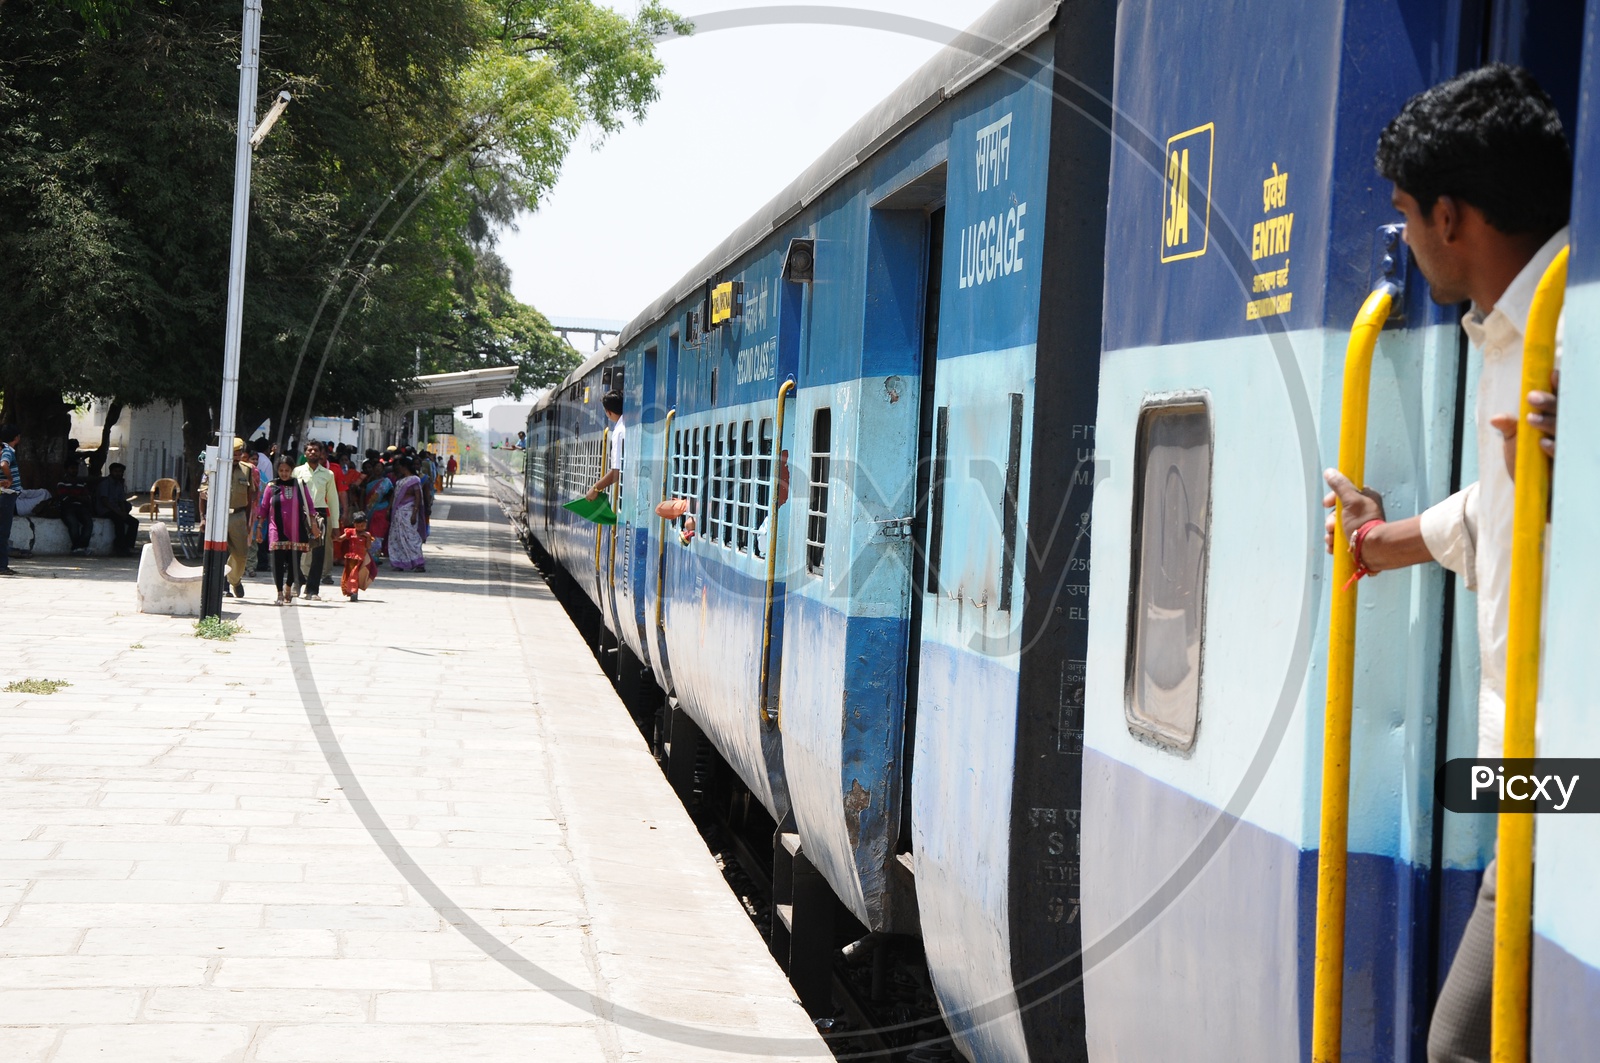 Passengers Walking on Railway Station Footpath With a Train Stranded on Platform